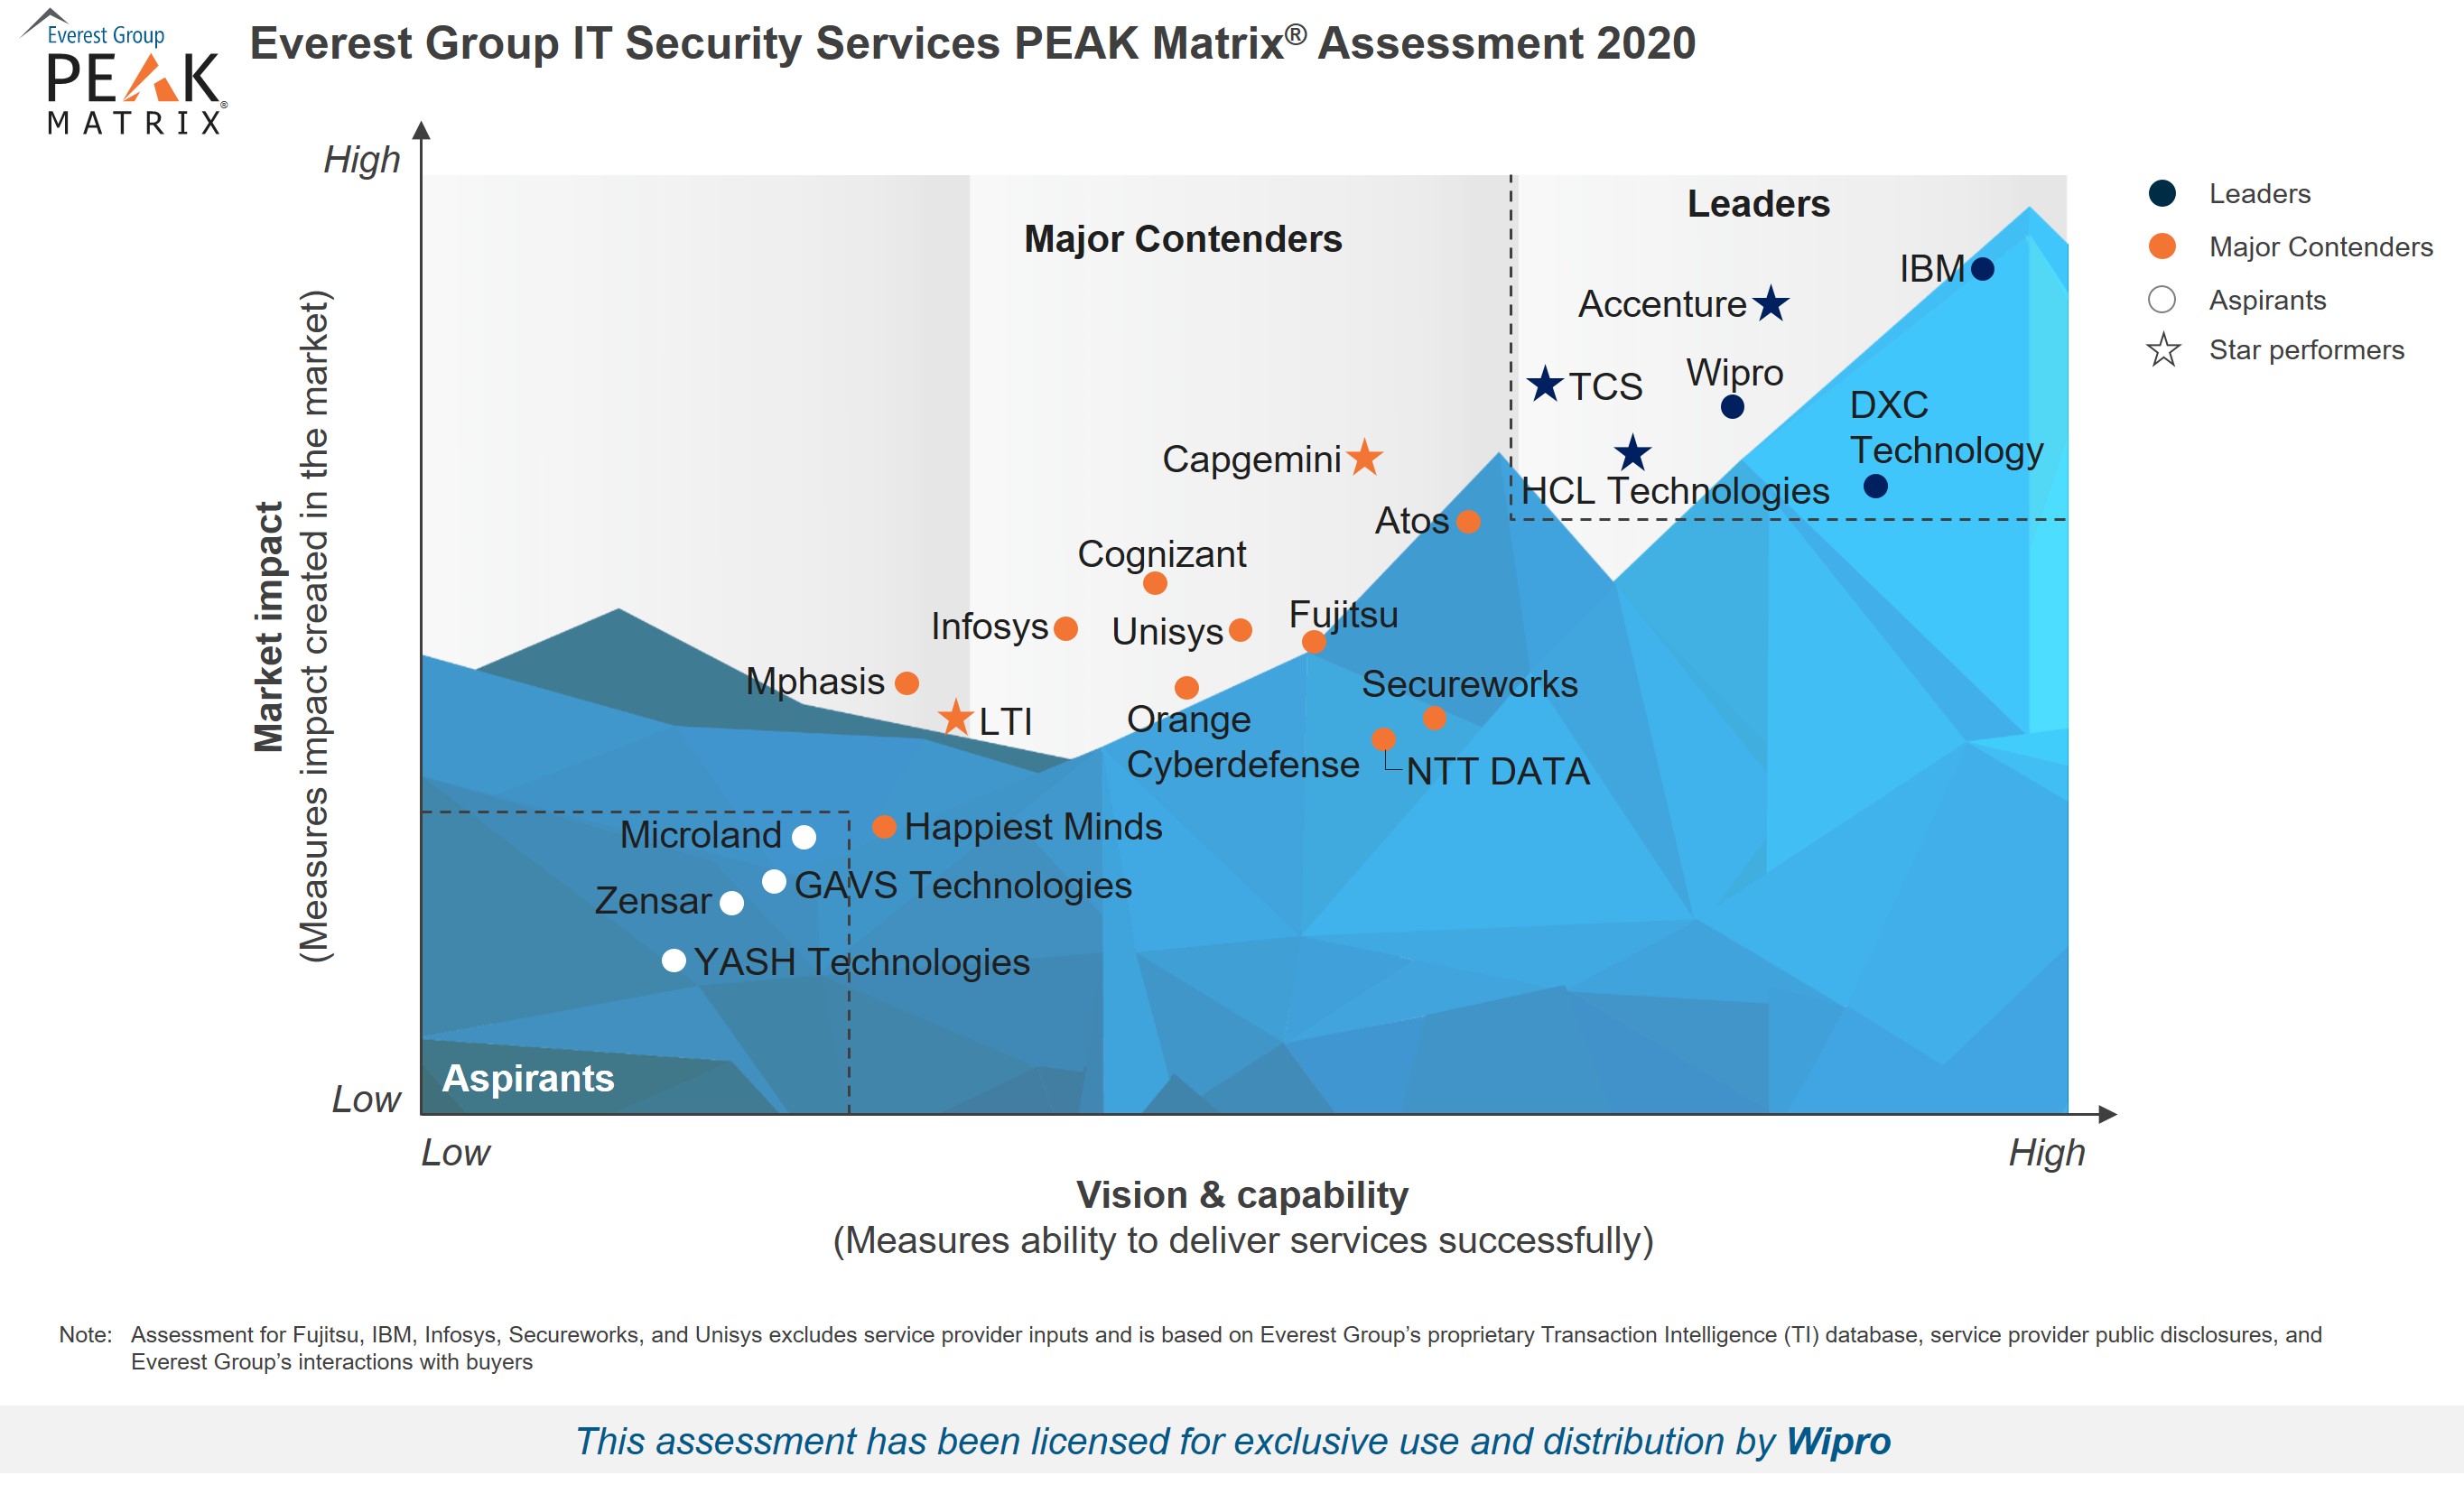 Wipro rated as a Leader in IT Security Services PEAK Matrix® Assessment 2020